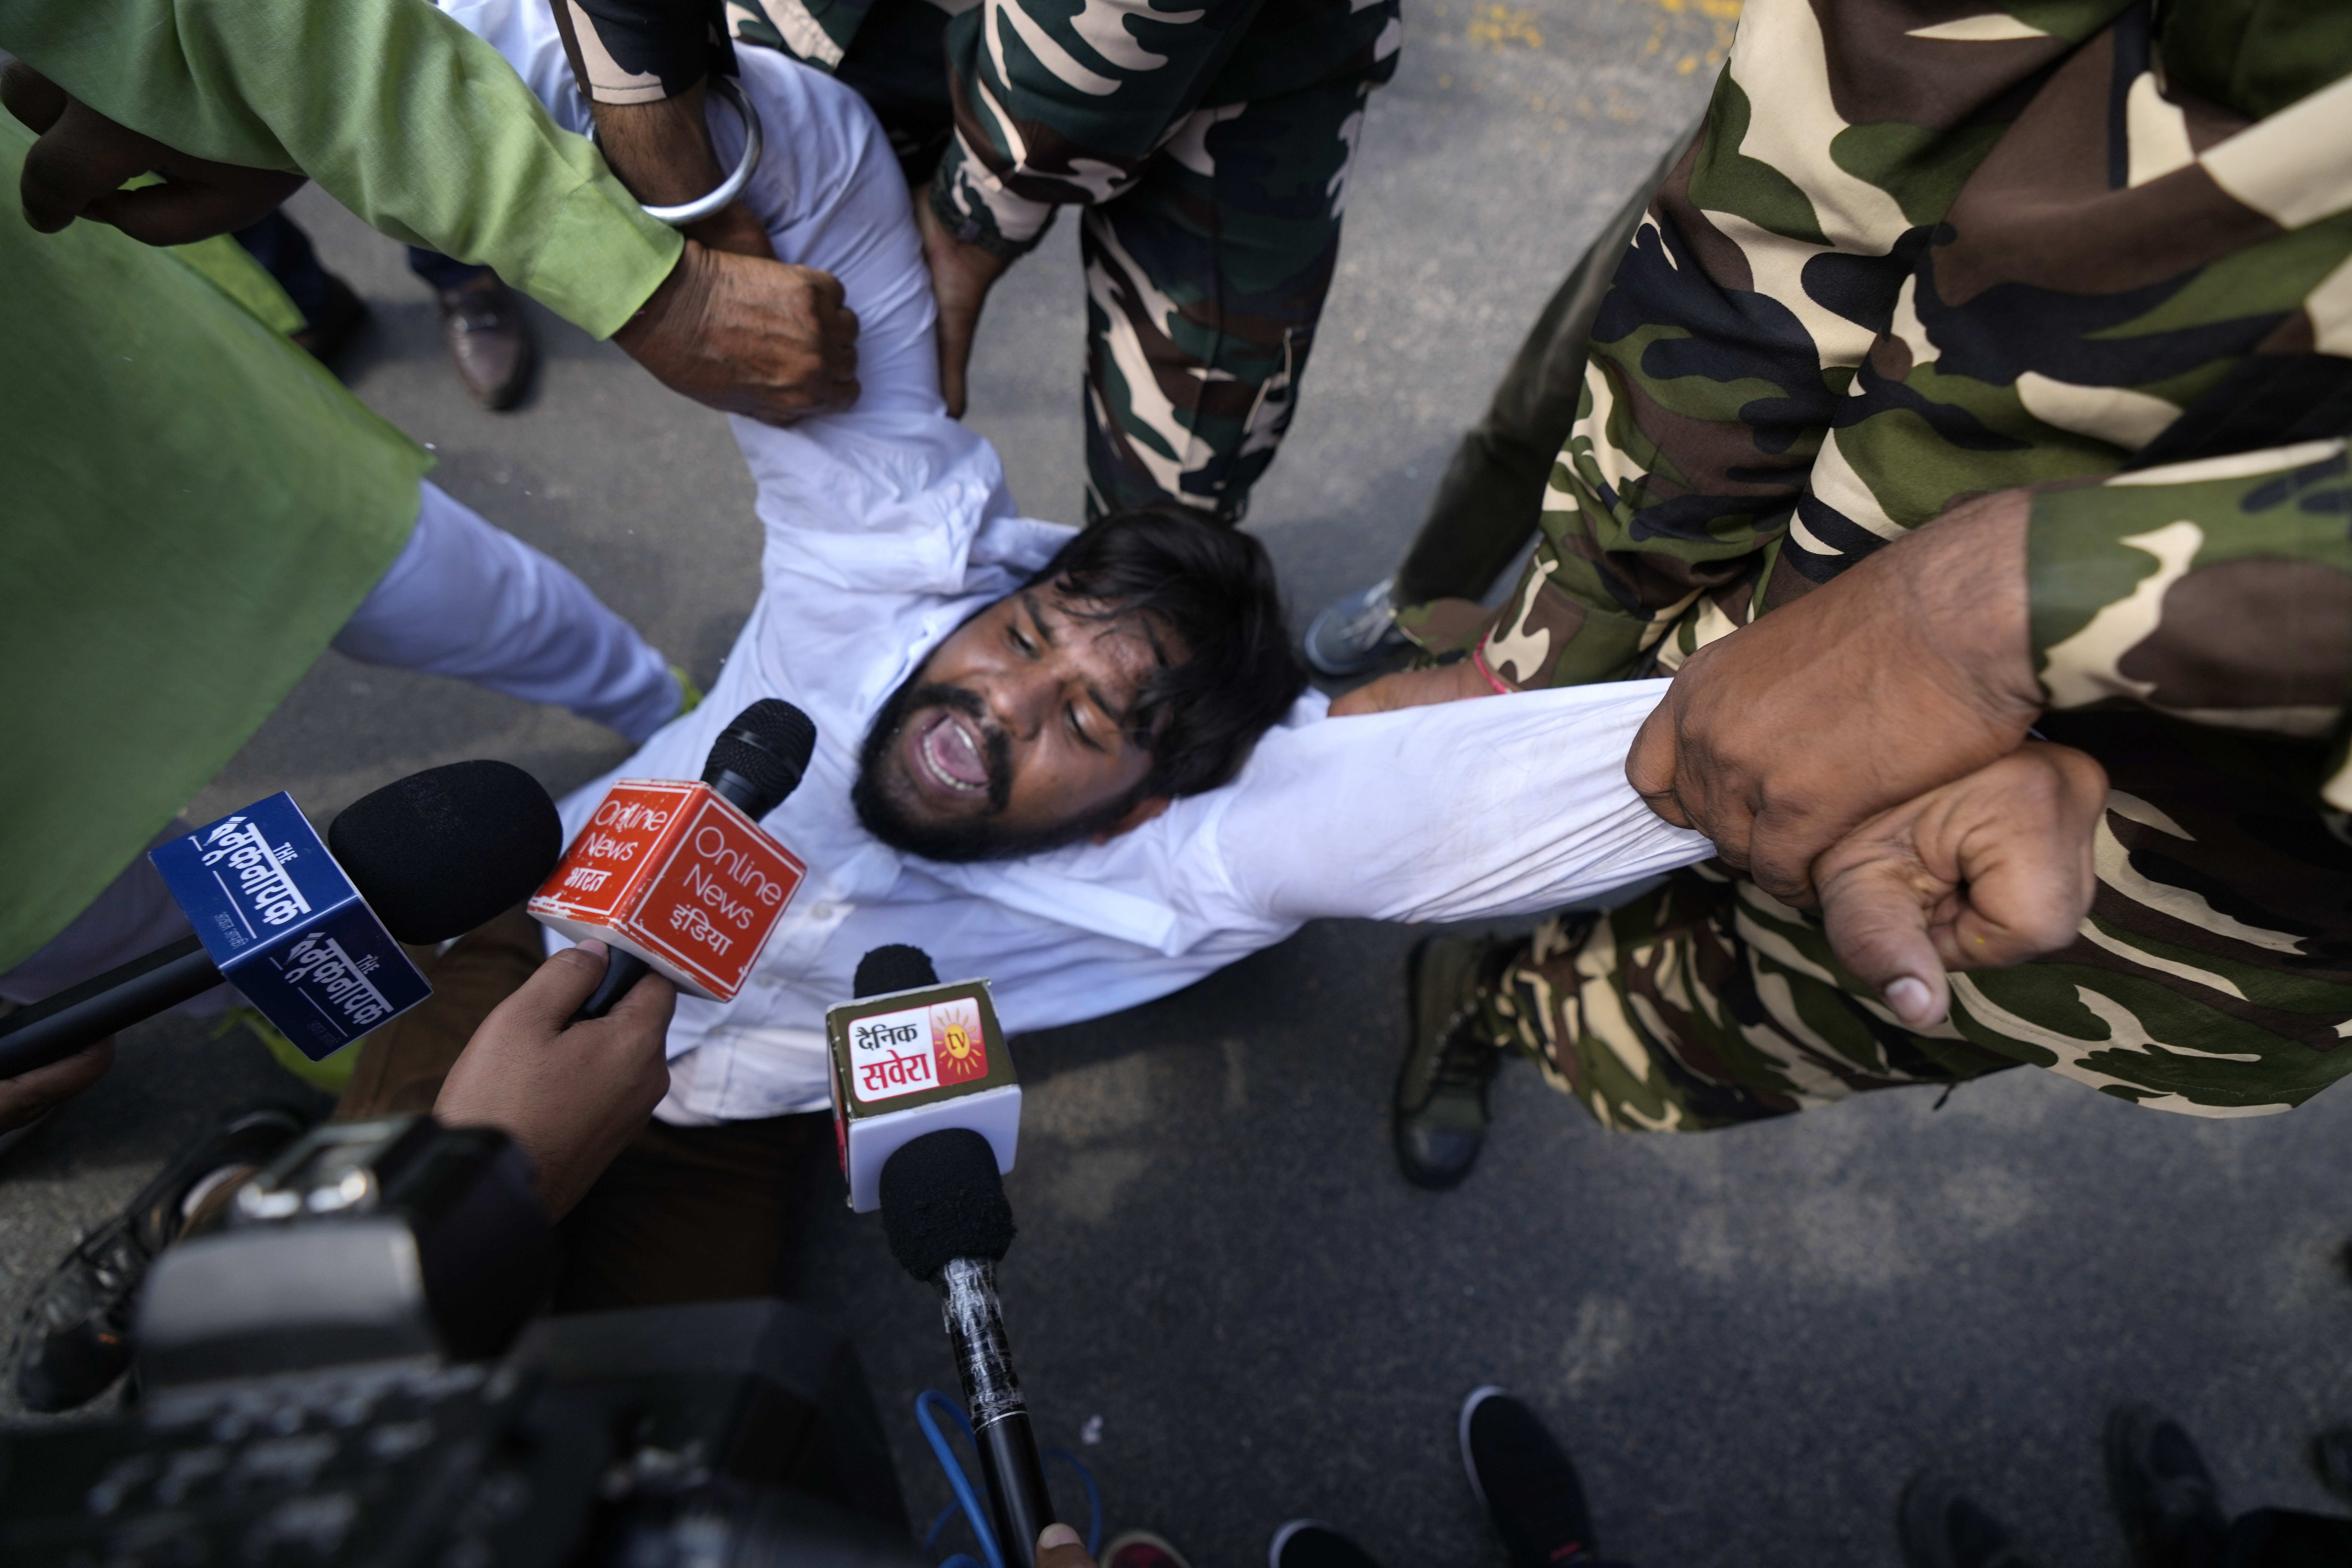 Paramilitary force soldiers detain an activist of Congress party's youth wing protesting against Sunday's killing of four farmers in Uttar Pradesh state after being run over by a car owned by India's junior home minister in New Delhi, India, Monday, Oct. 4, 2021. Indian authorities suspended internet services and barred political leaders from entering a northern town Monday to calm tensions after nine people were killed in a deadly escalation of a yearlong demonstration against contentious agriculture laws. (AP Photo/Manish Swarup)